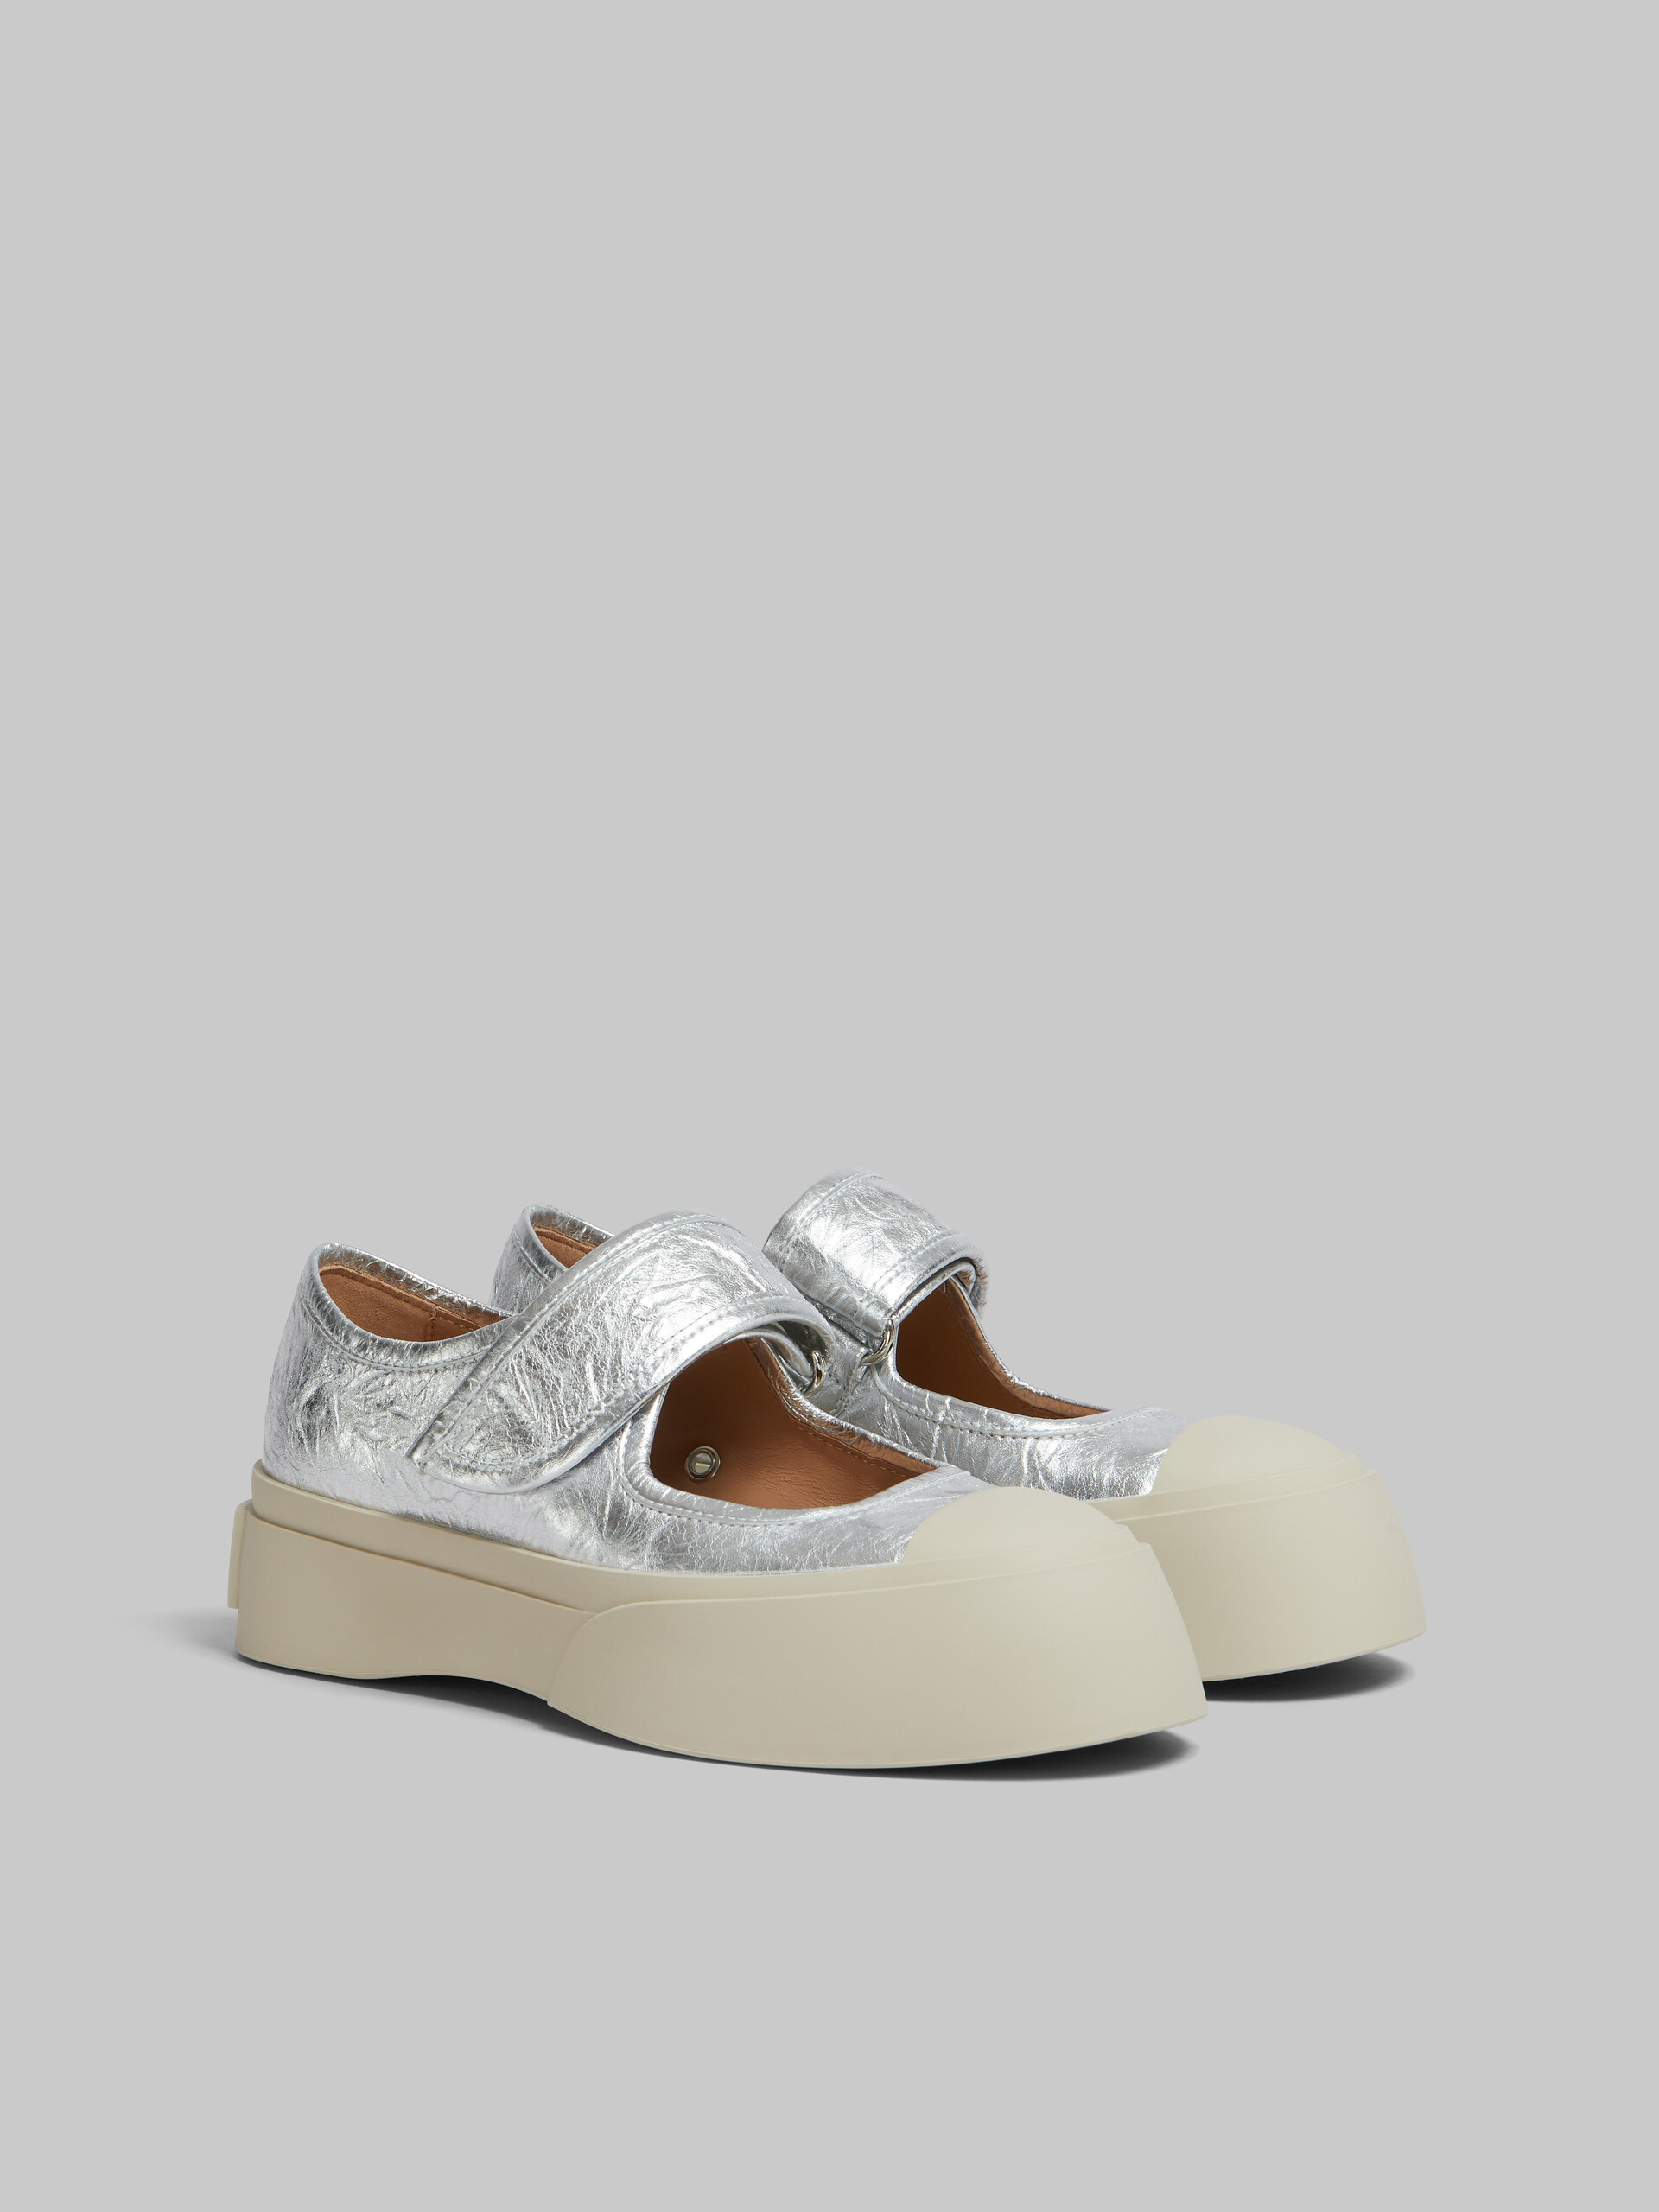 Silver leather Mary Jane sneaker - Sneakers - Image 2